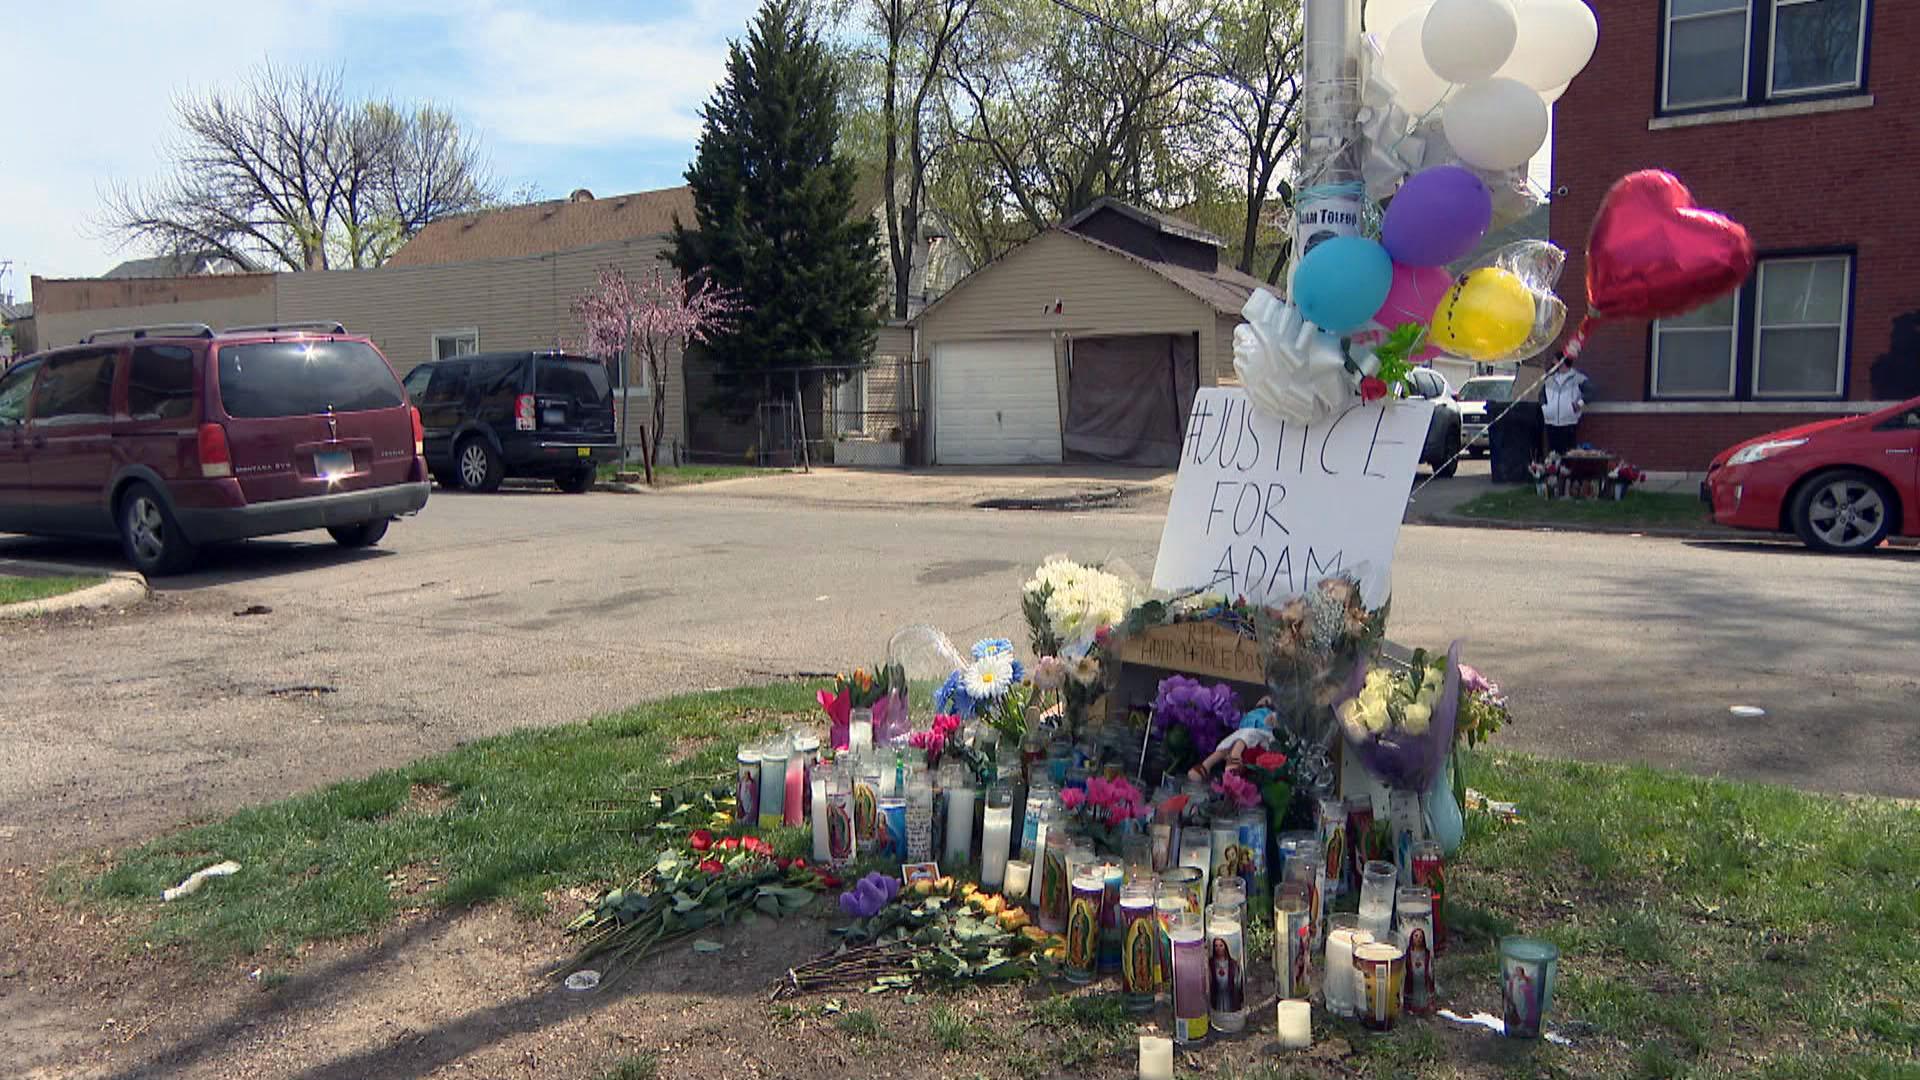 A memorial of candles and flowers for 13-year-old Adam Toledo sits near the alley where he was killed March 29 by a Chicago police officer. (WTTW News)